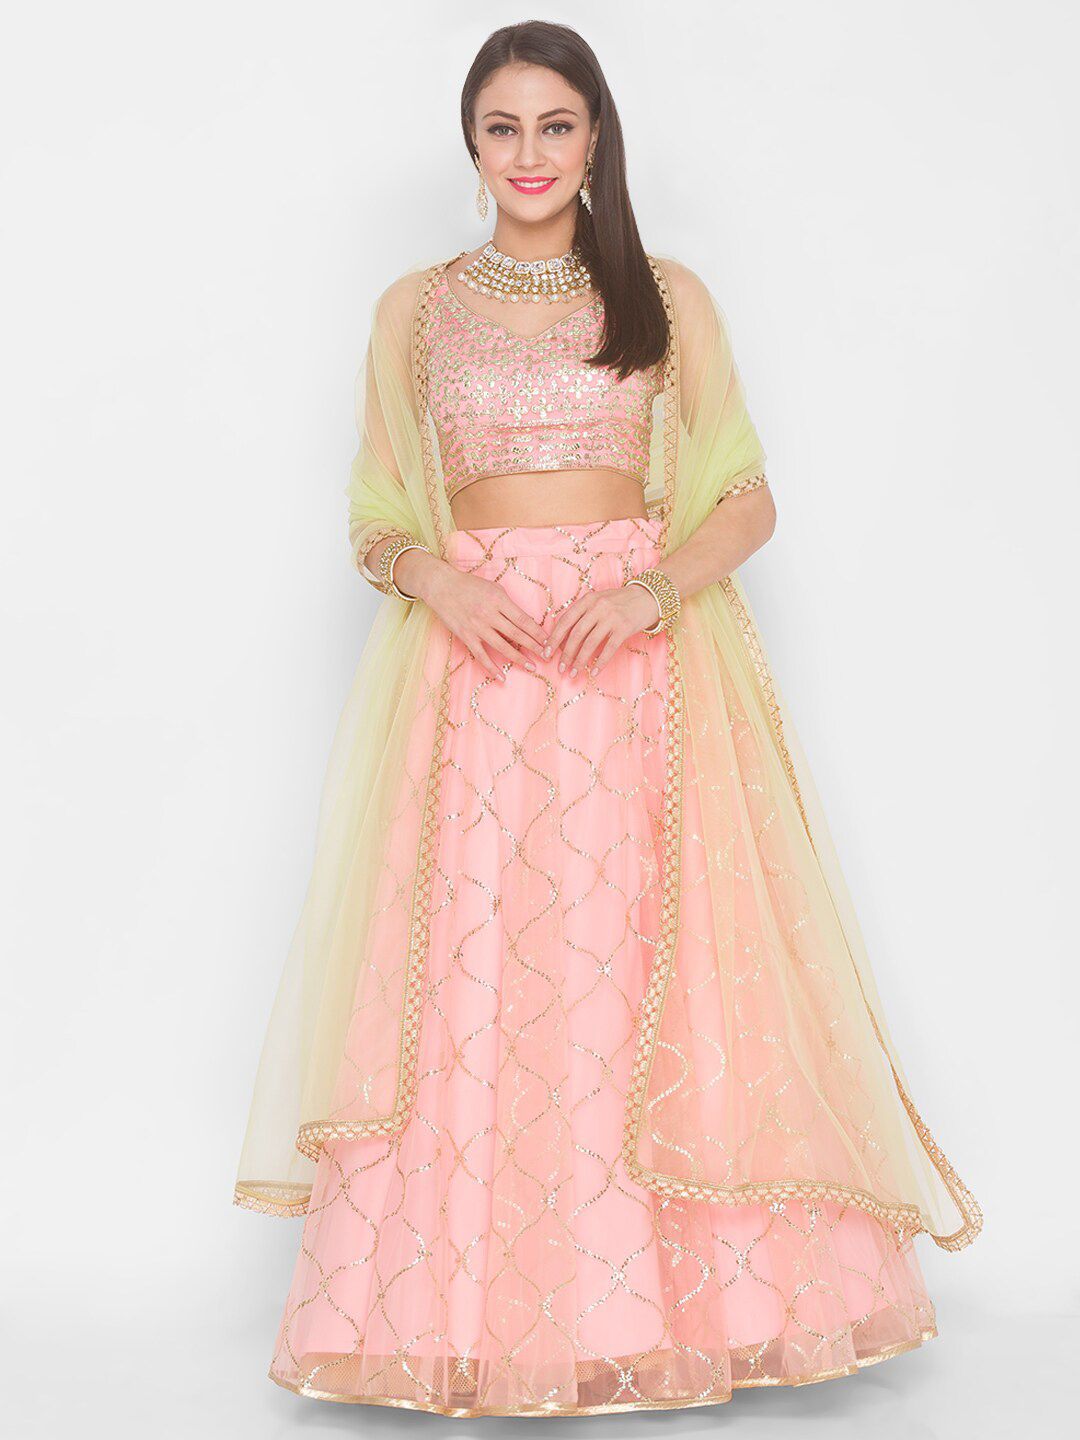 6Y COLLECTIVE Peach-Coloured & Gold-Toned Sequinned Semi-Stitched Lehenga Choli Price in India